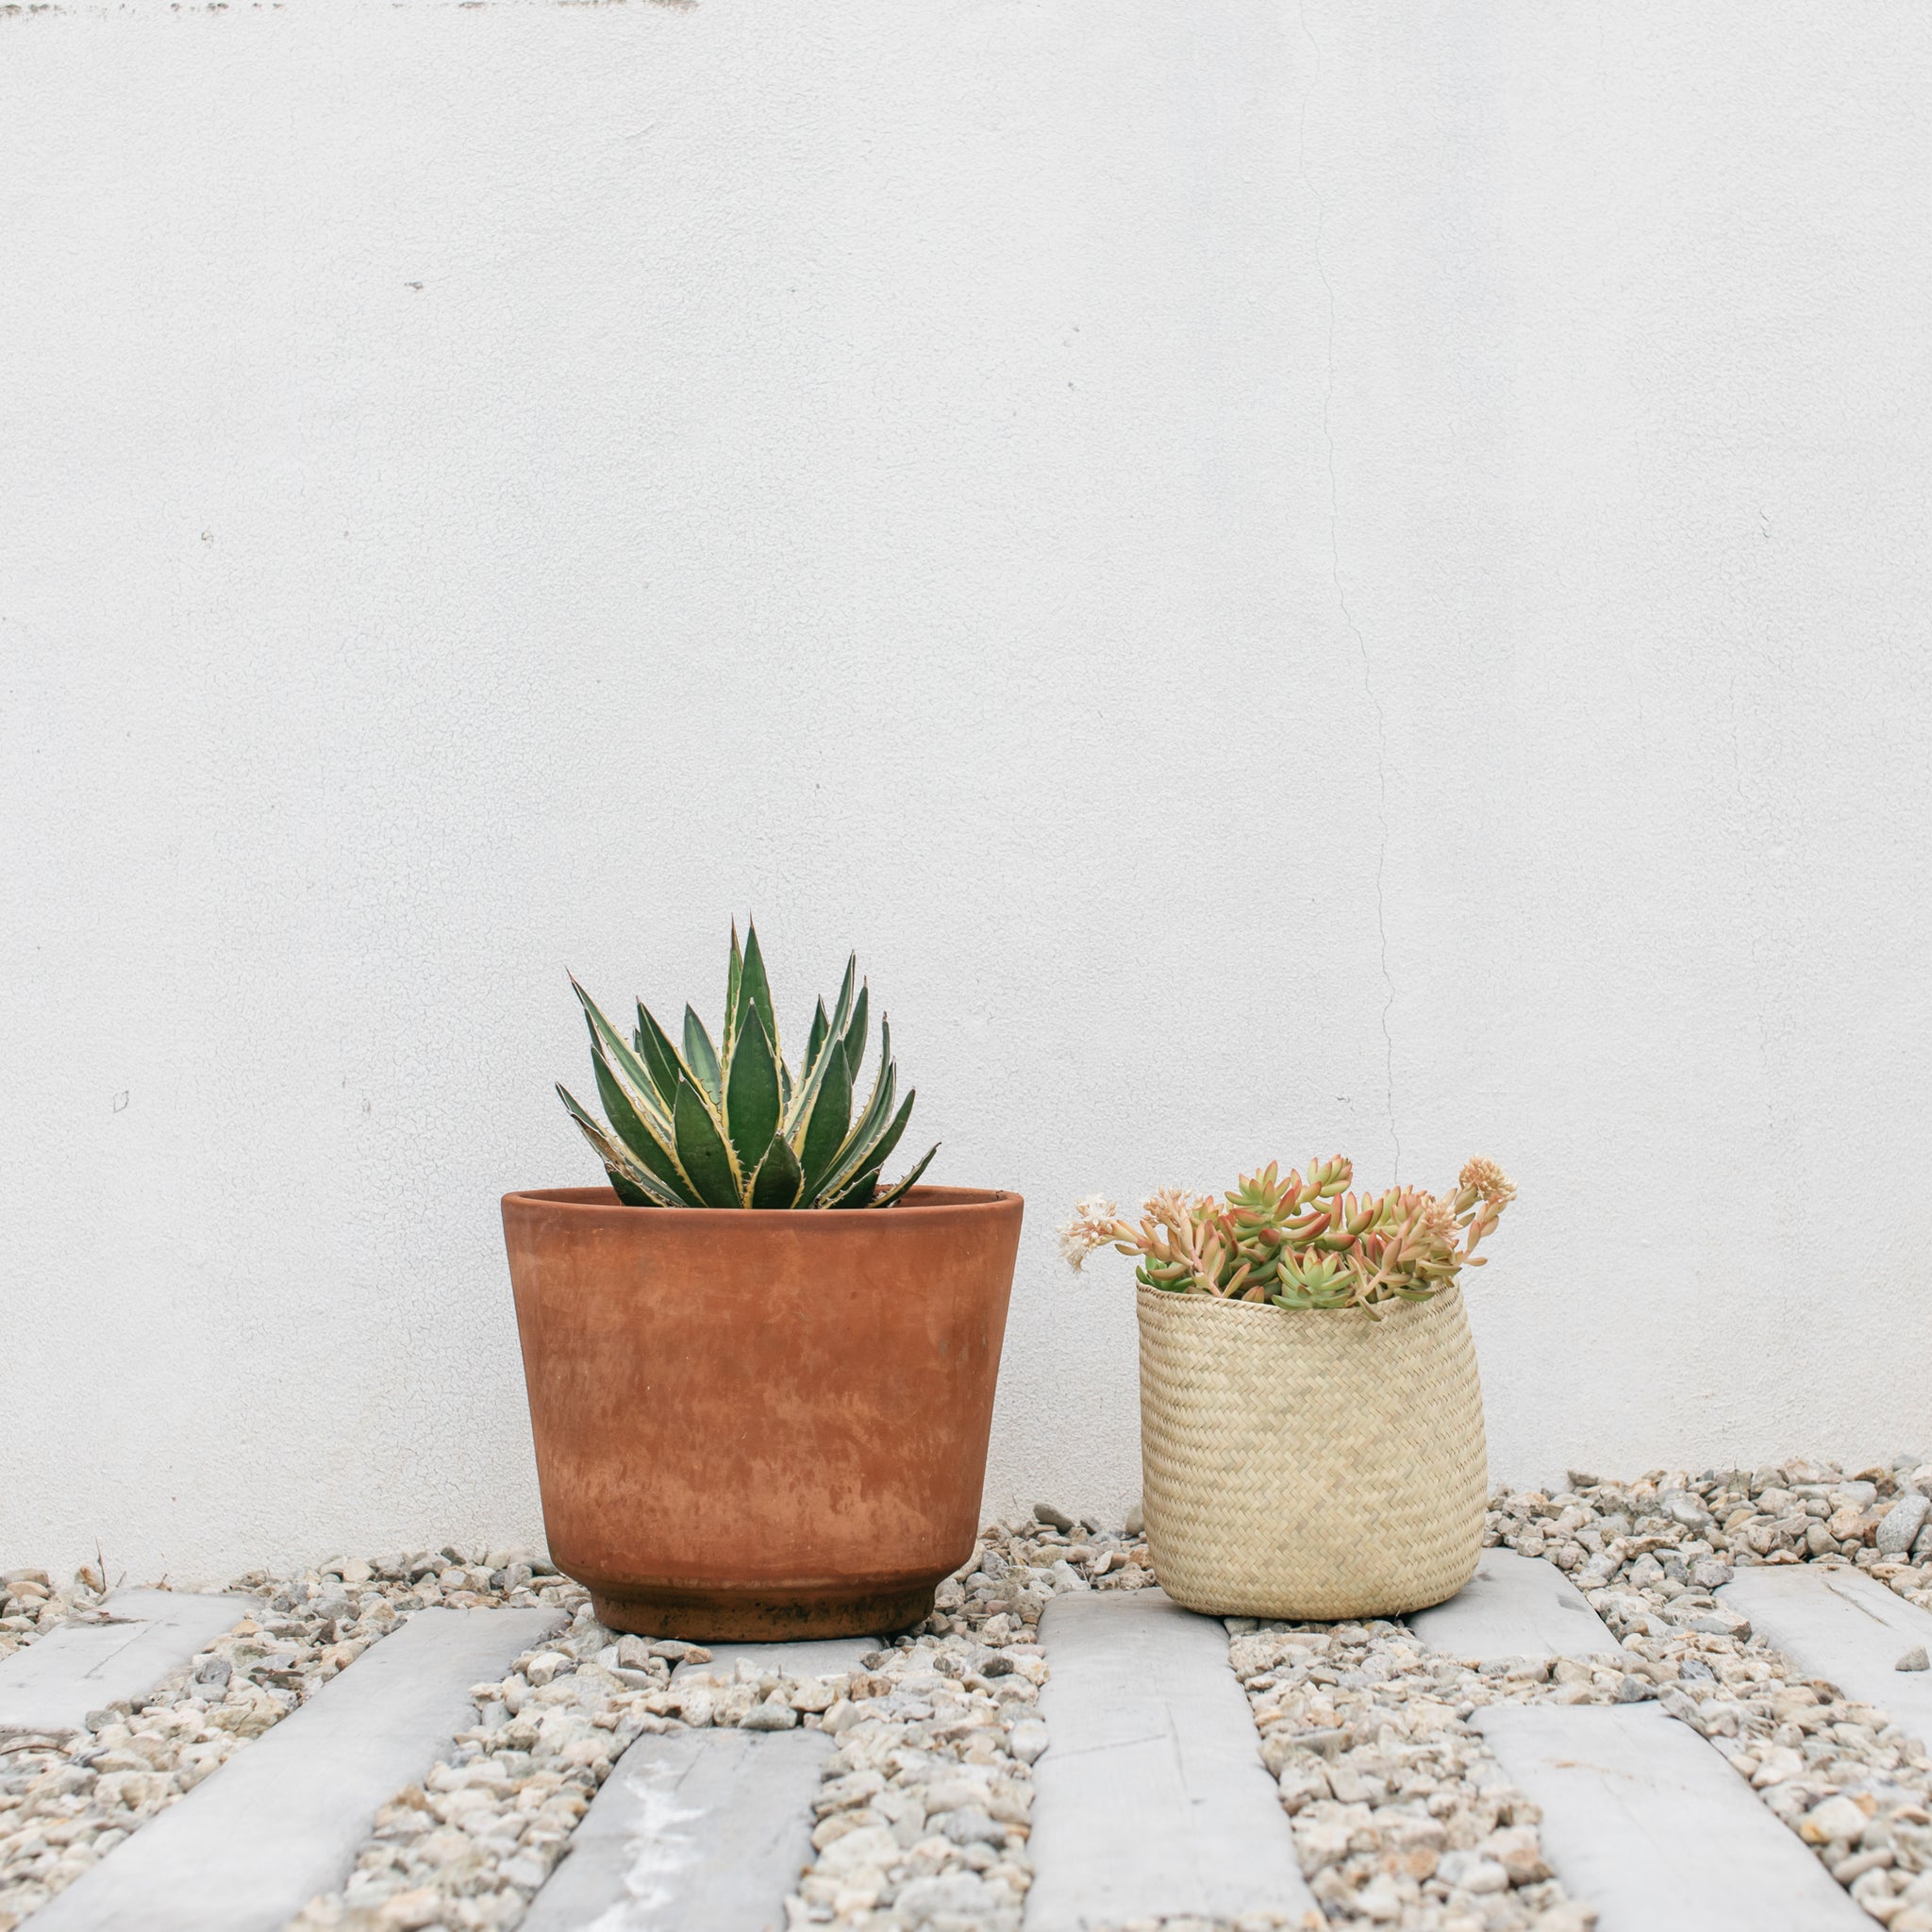 Small Oaxaca handwoven basket with terracotta pot with succulents and a cactus.